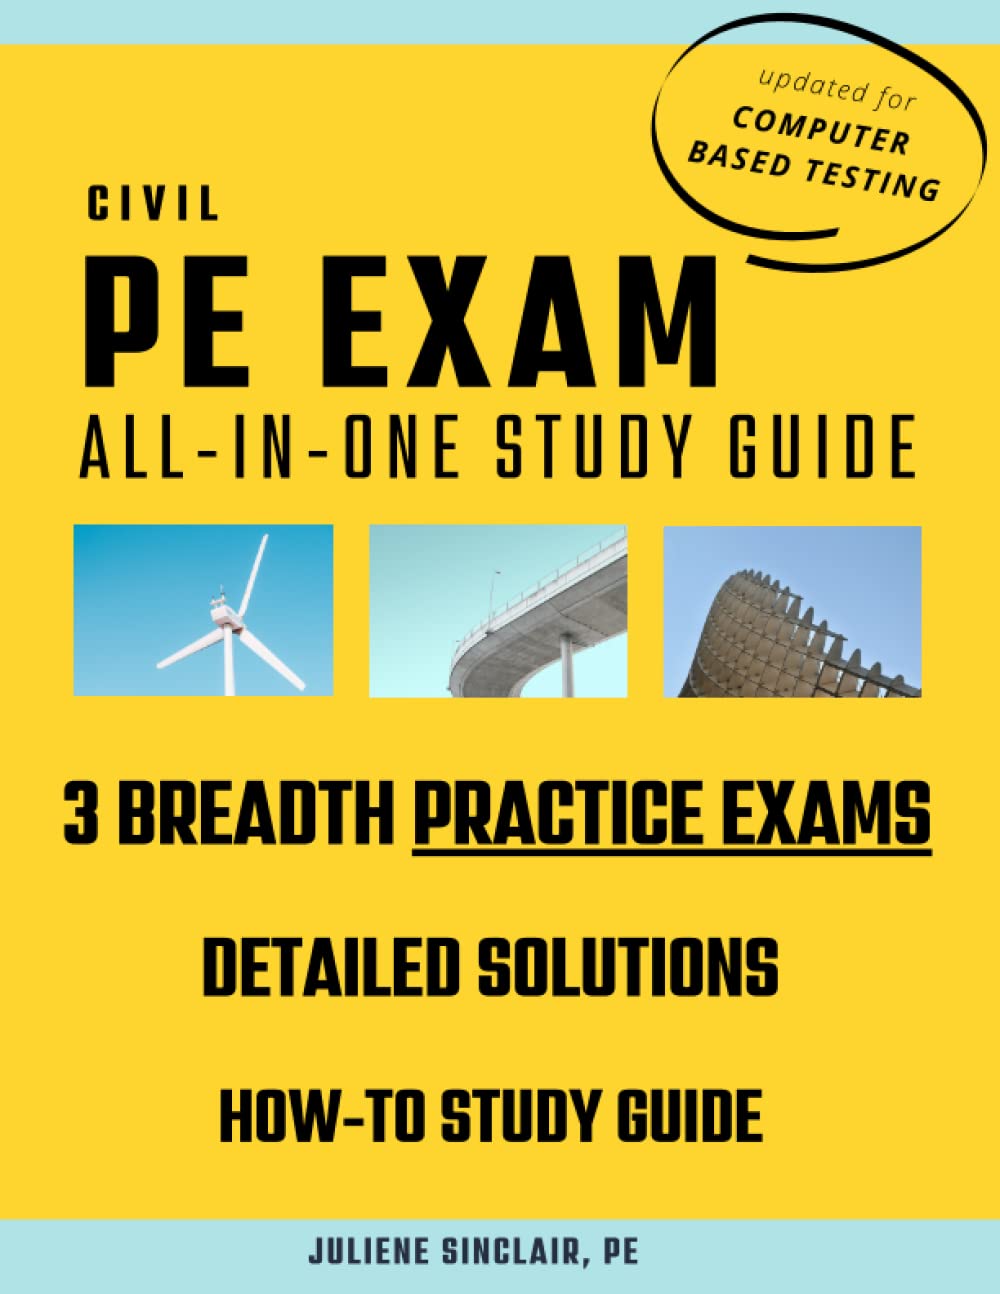 Civil PE Exam All-in-One Study Guide: Three Practice Exams, How-To Study Guide, Schedule, Motivation + More